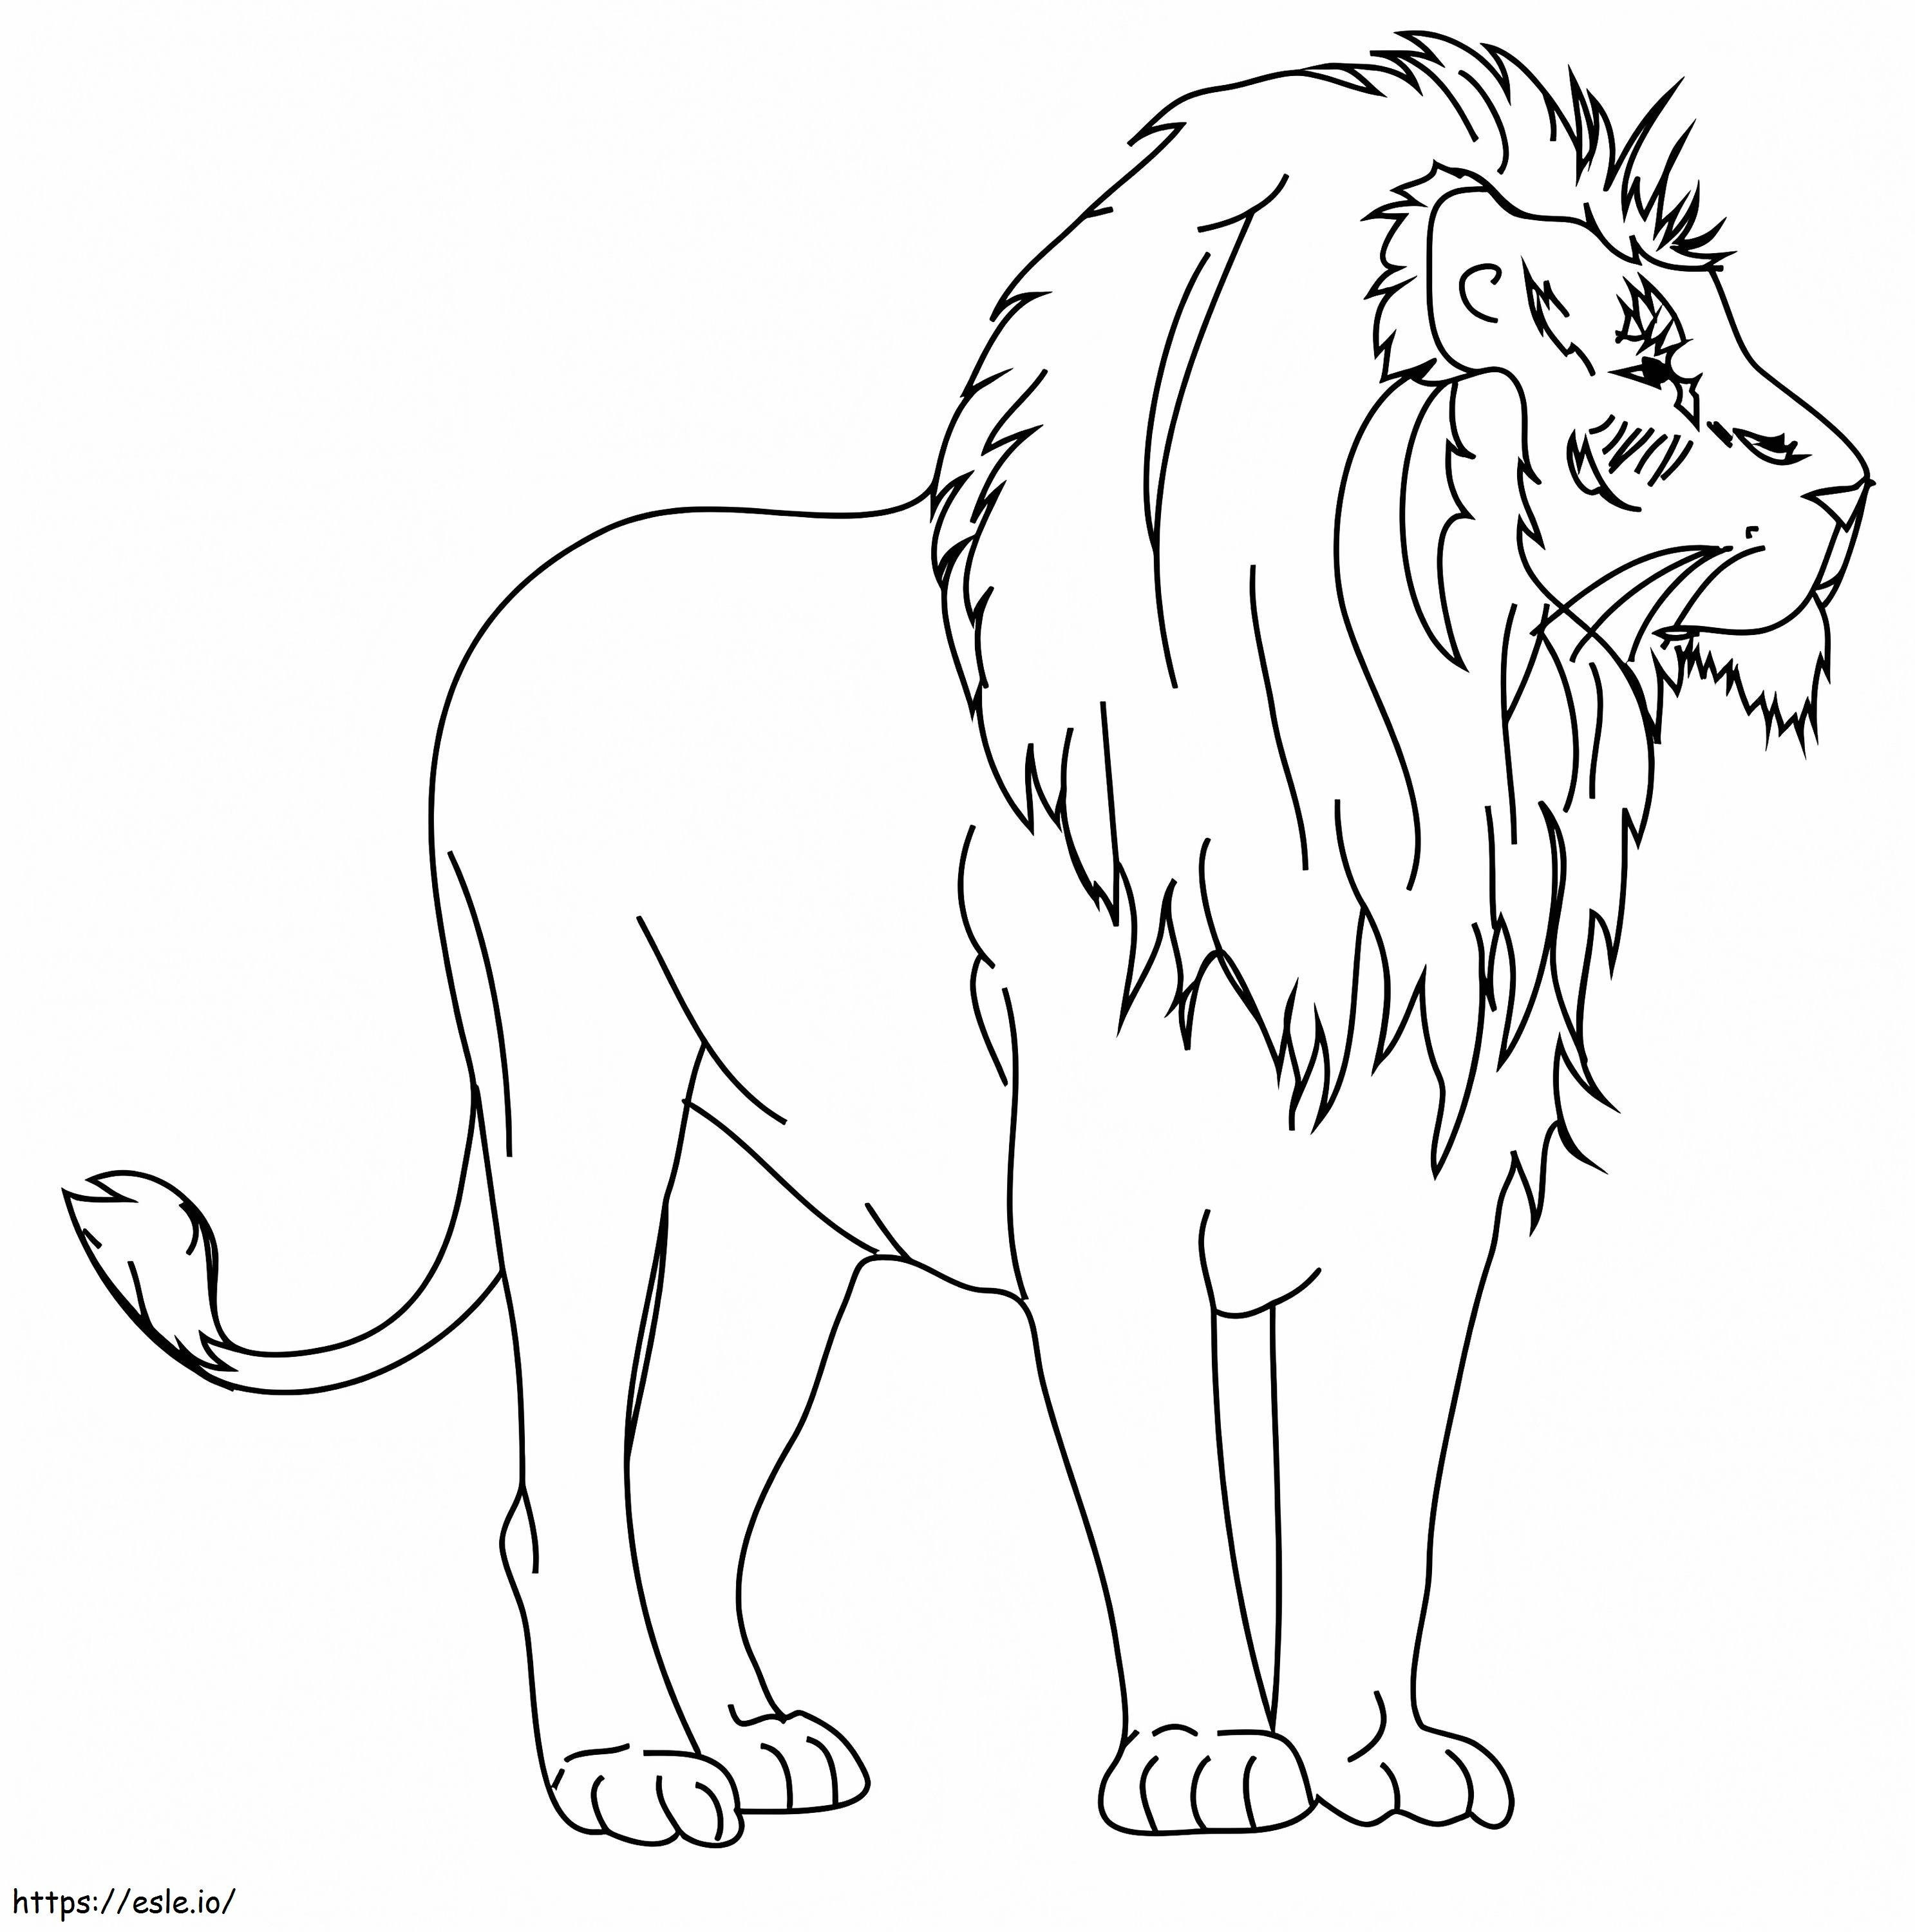 Normal Lion coloring page